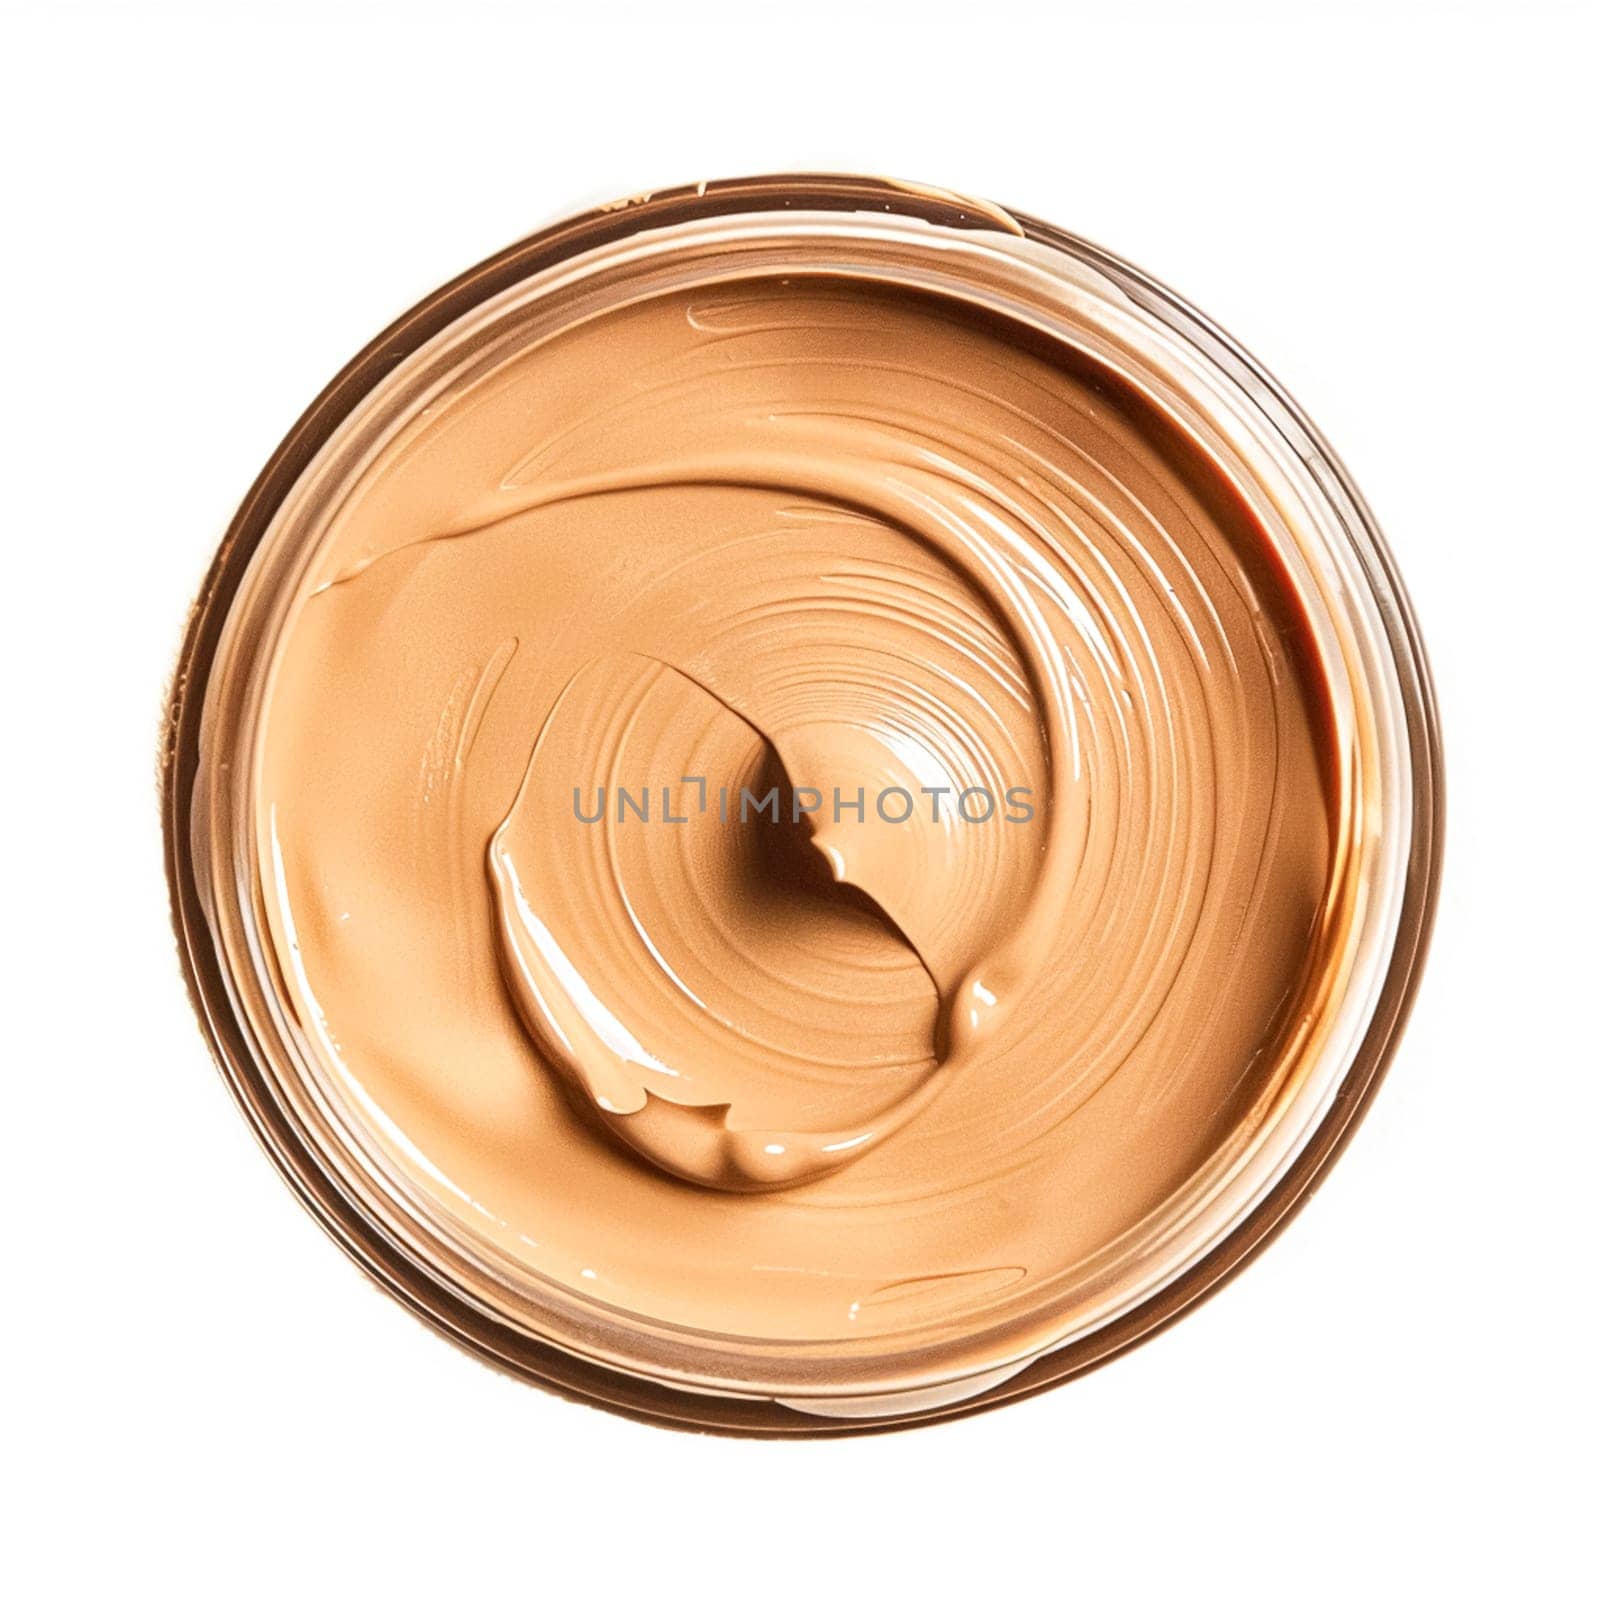 Make-up foundation texture as circle shape design, beauty product and cosmetics, makeup blush eyeshadow powder as abstract luxury cosmetic background by Anneleven